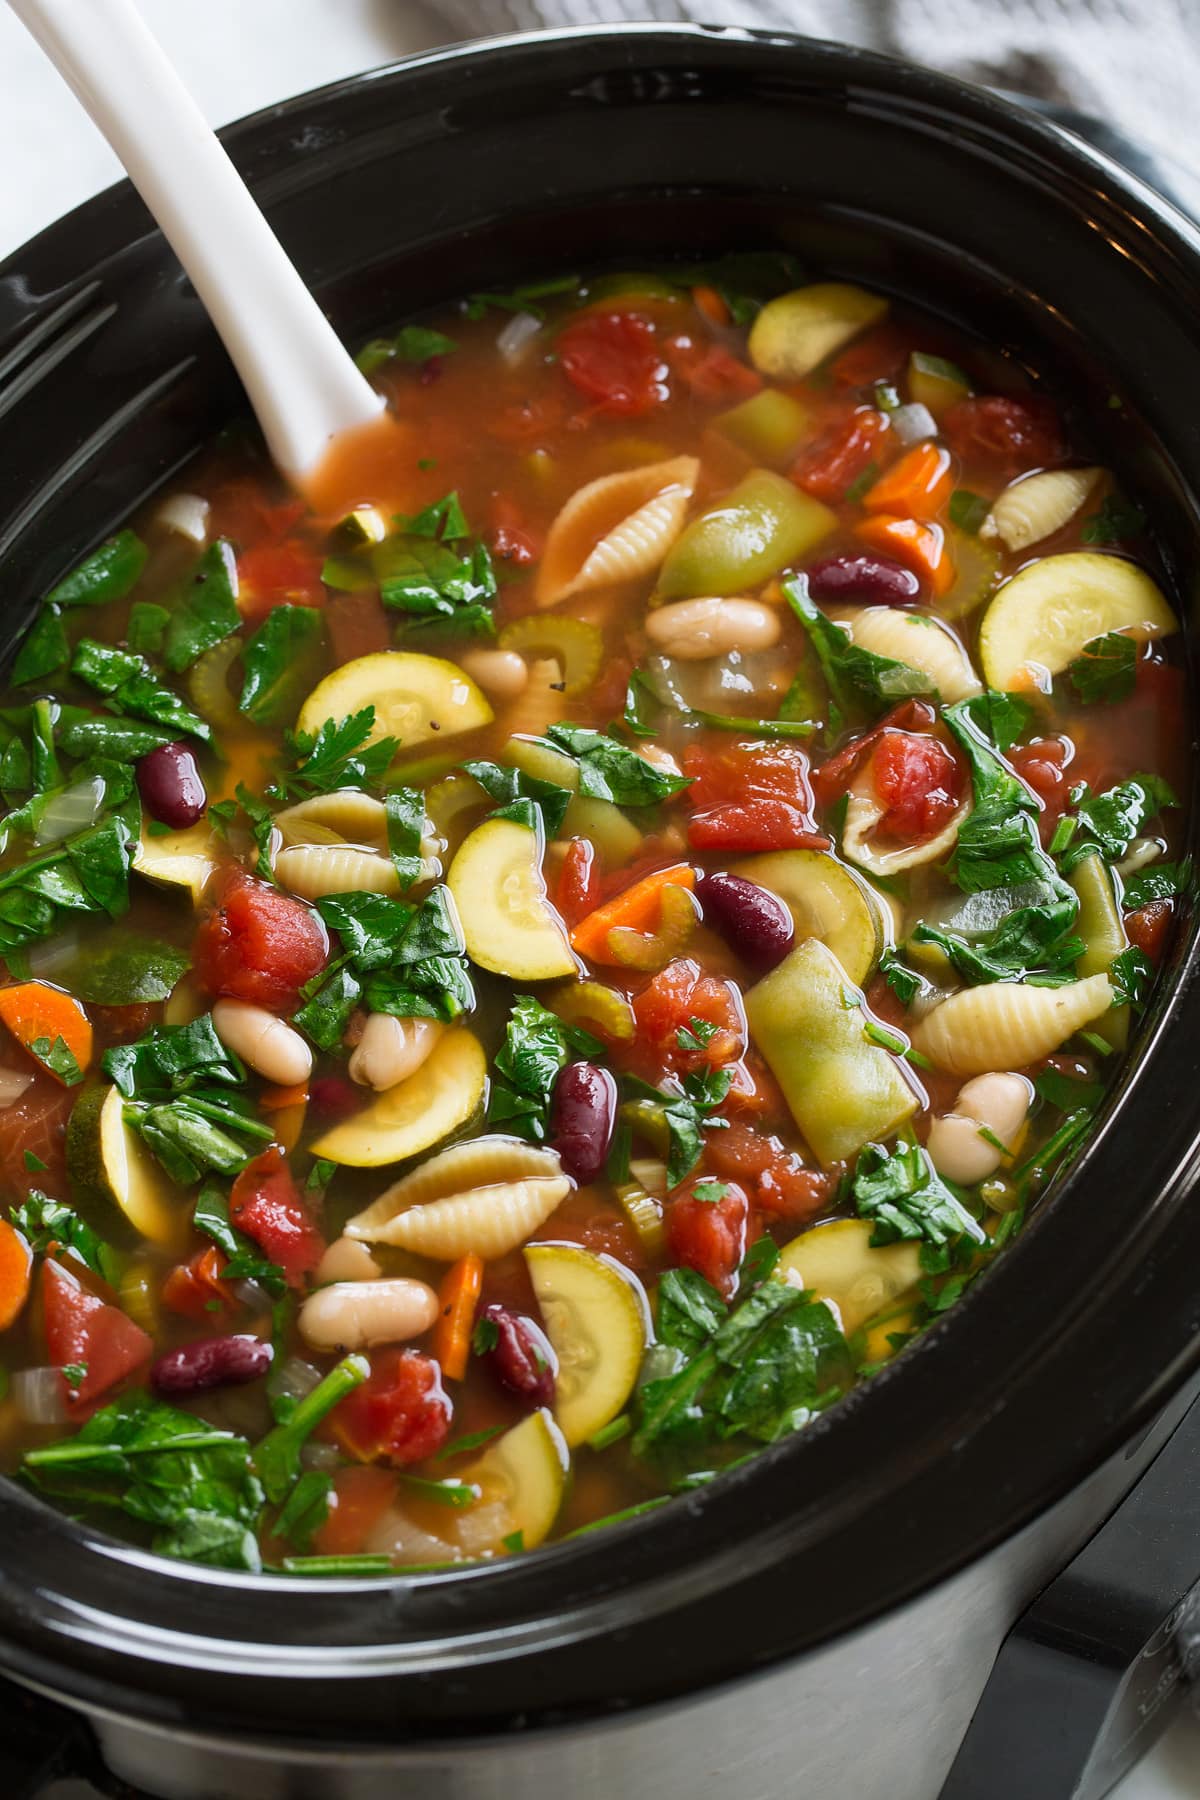 Minestrone Soup Slow Cooker Or Stovetop Method - Cooking Classy